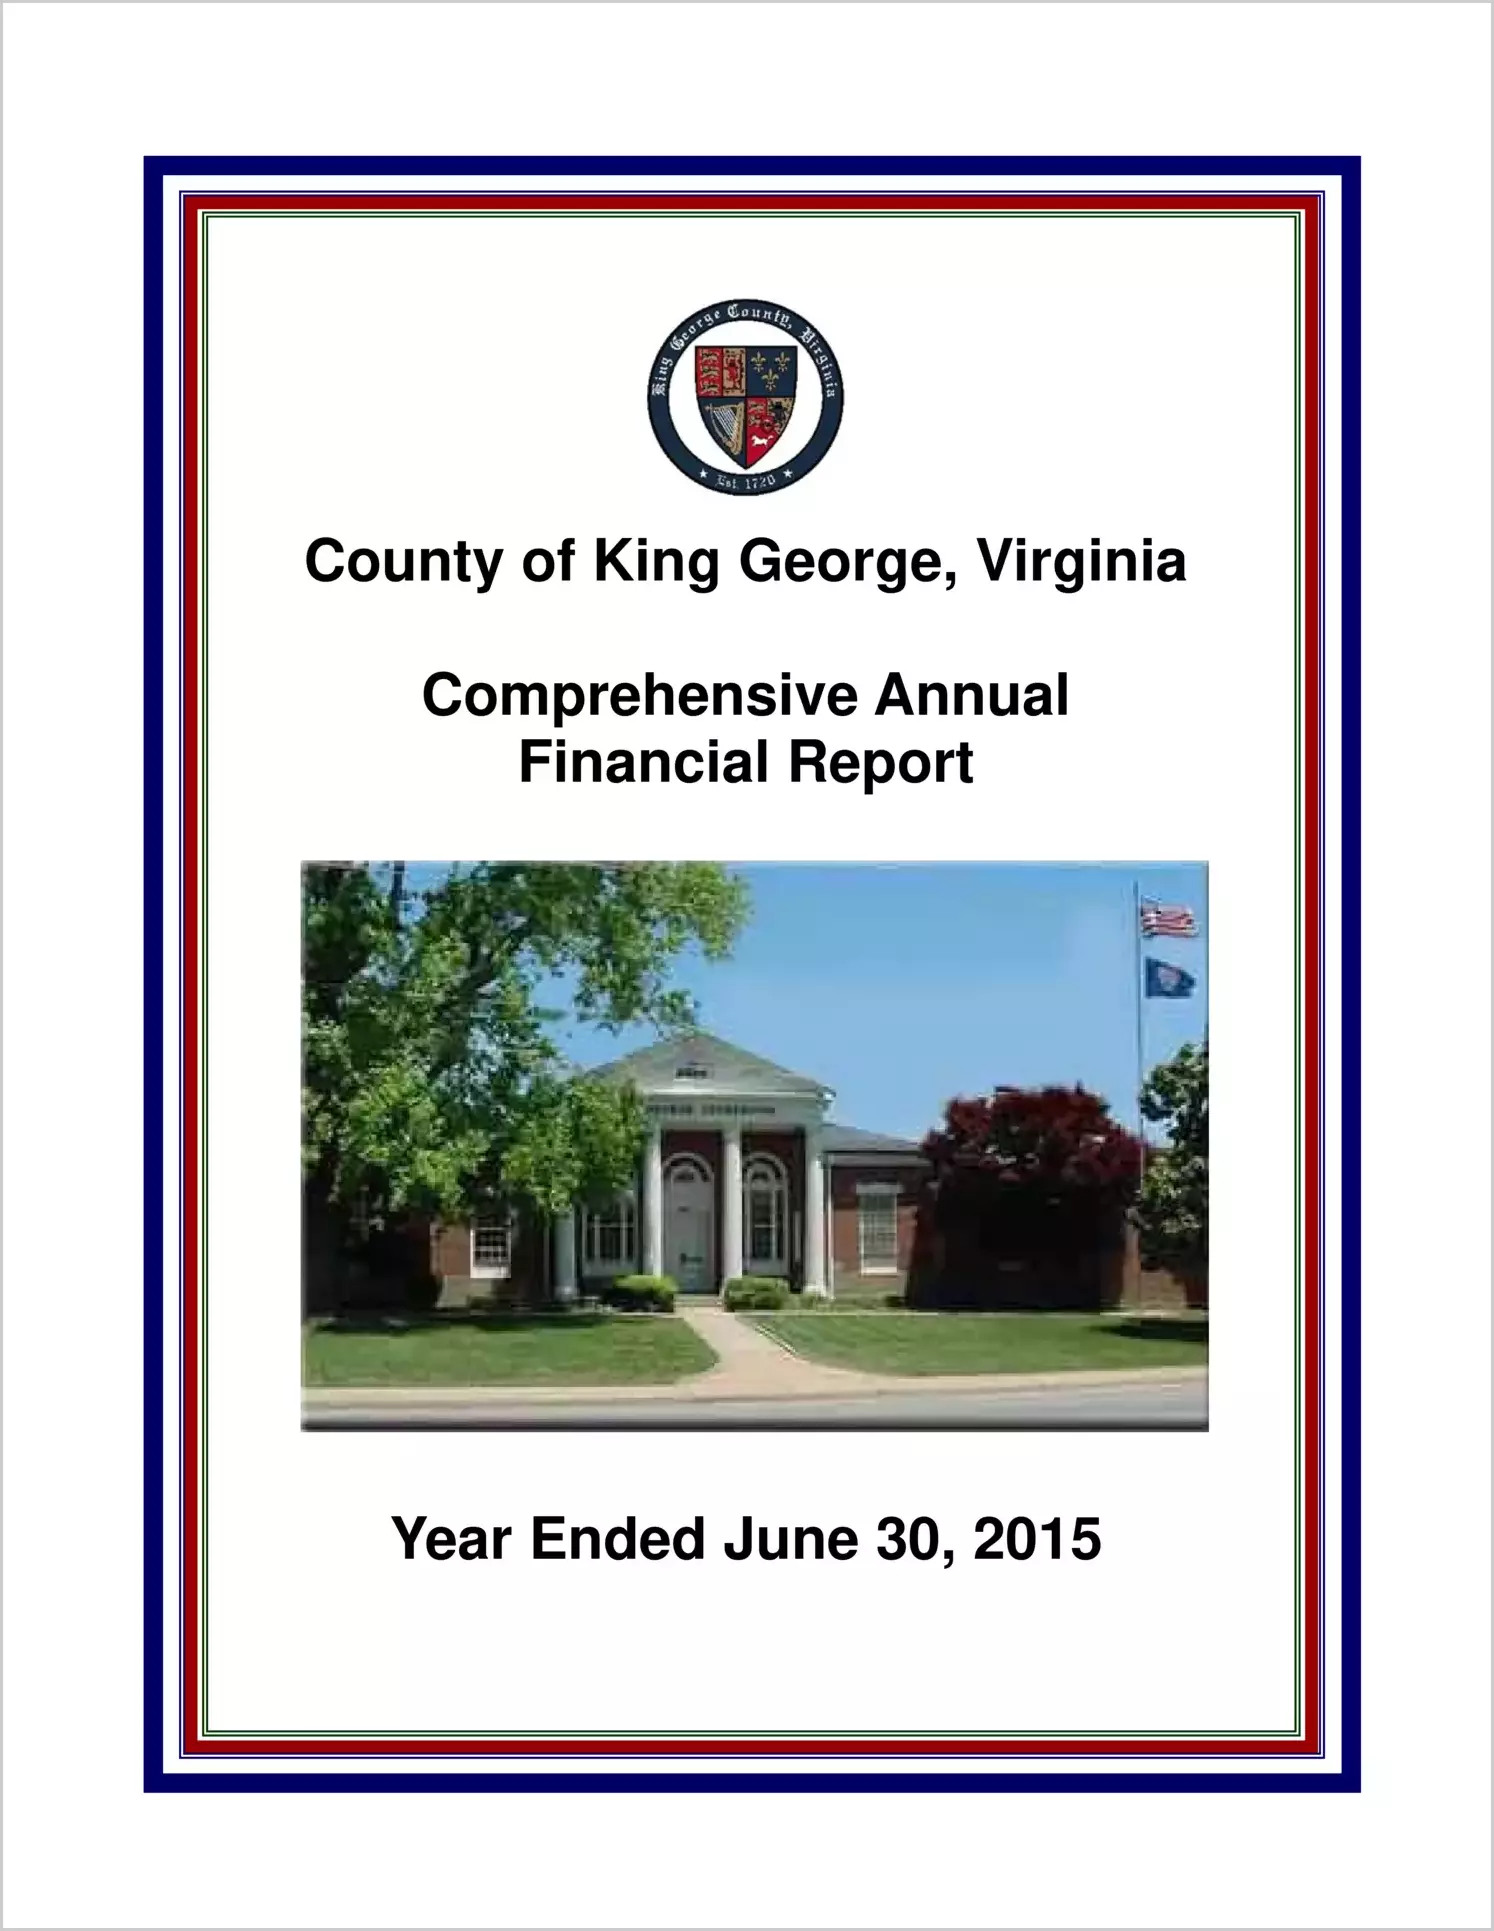 2015 Annual Financial Report for County of King George